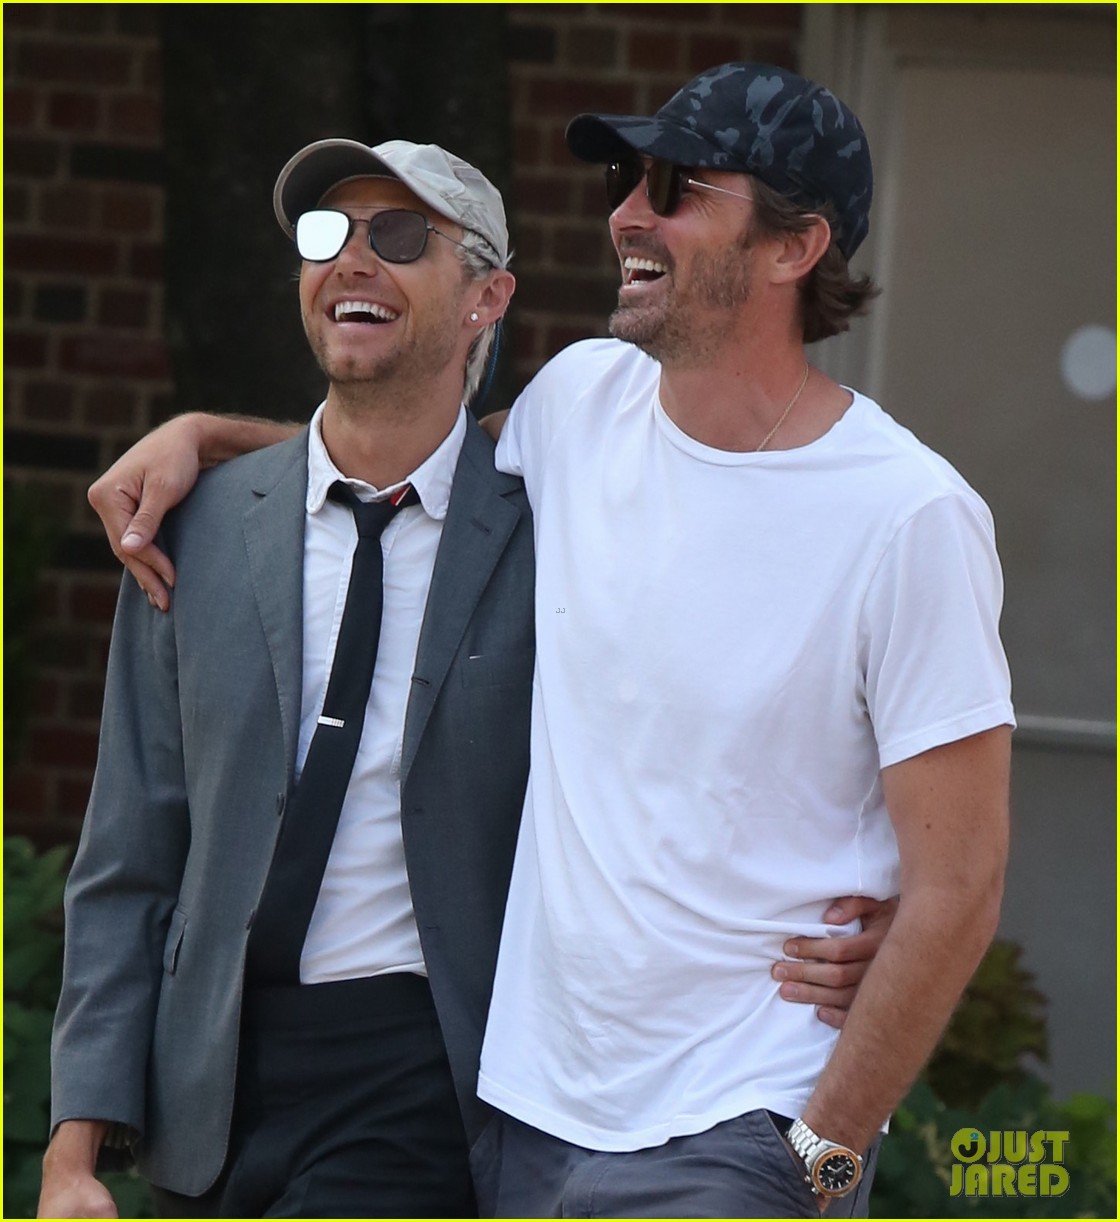 Lee Pace wraps his arm around boyfriend Matthew Foley while going for a str...